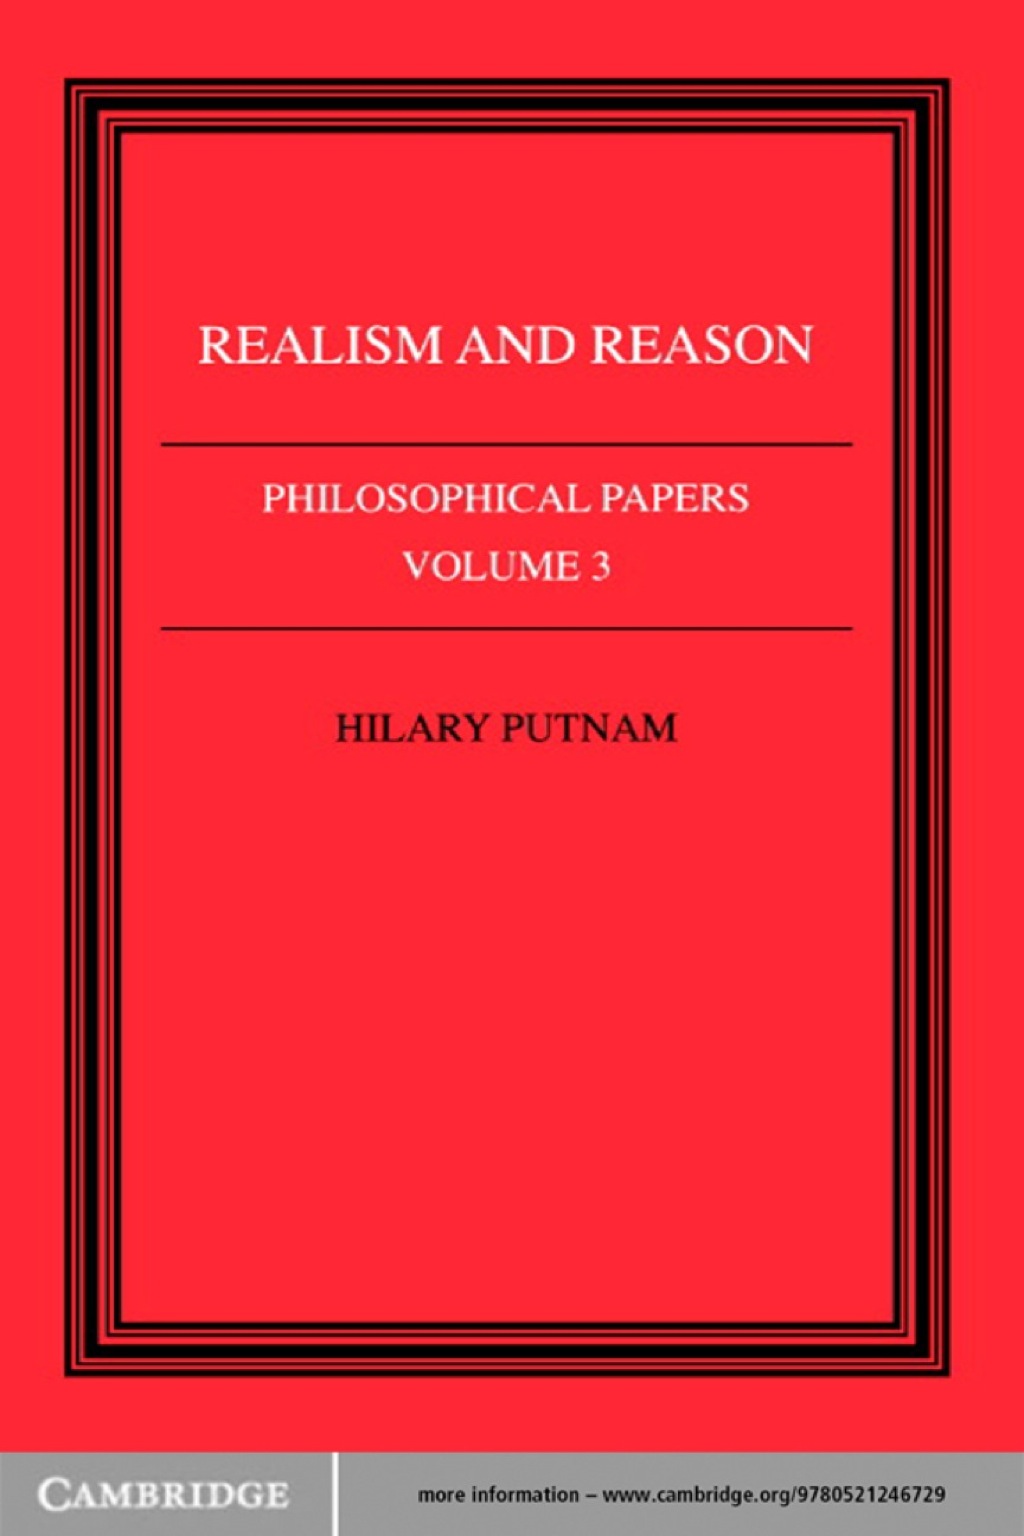 Philosophical Papers: Volume 3  Realism and Reason (eBook) - Hilary Putnam